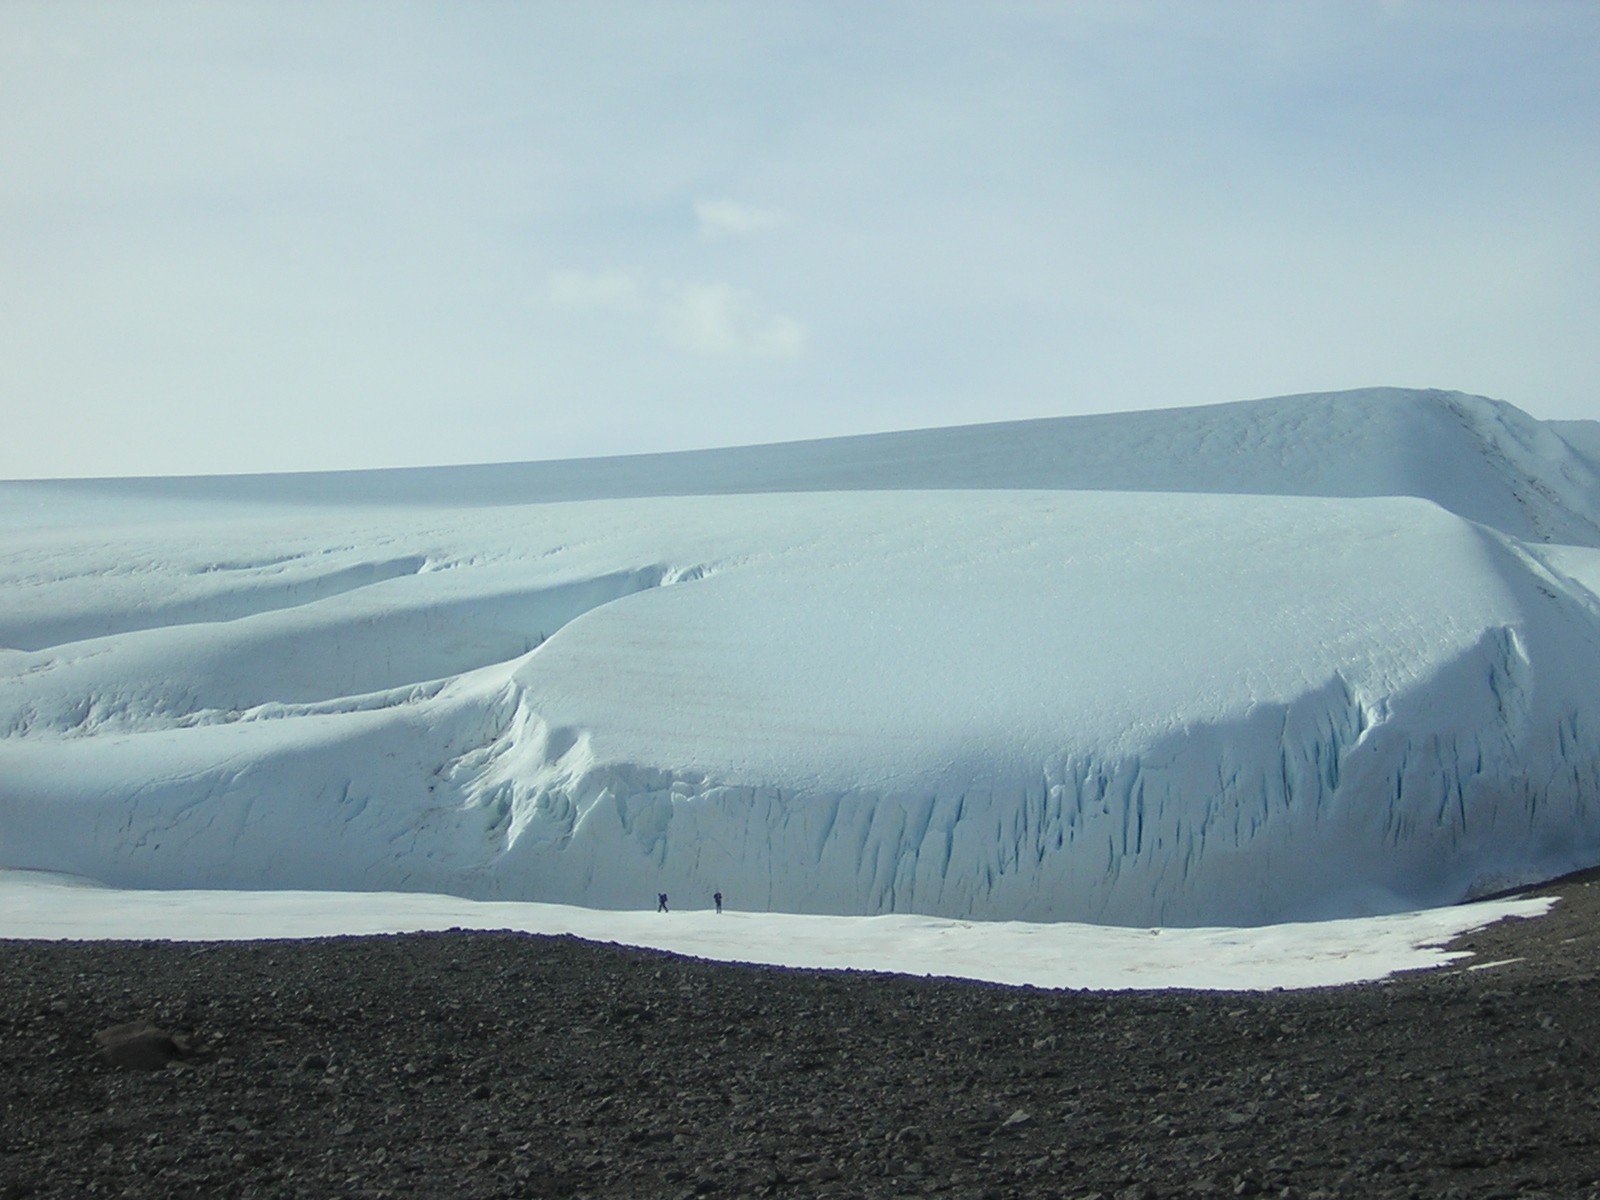 Standing on a glacier margin in the McMurdo Dry Valleys of Antarctica